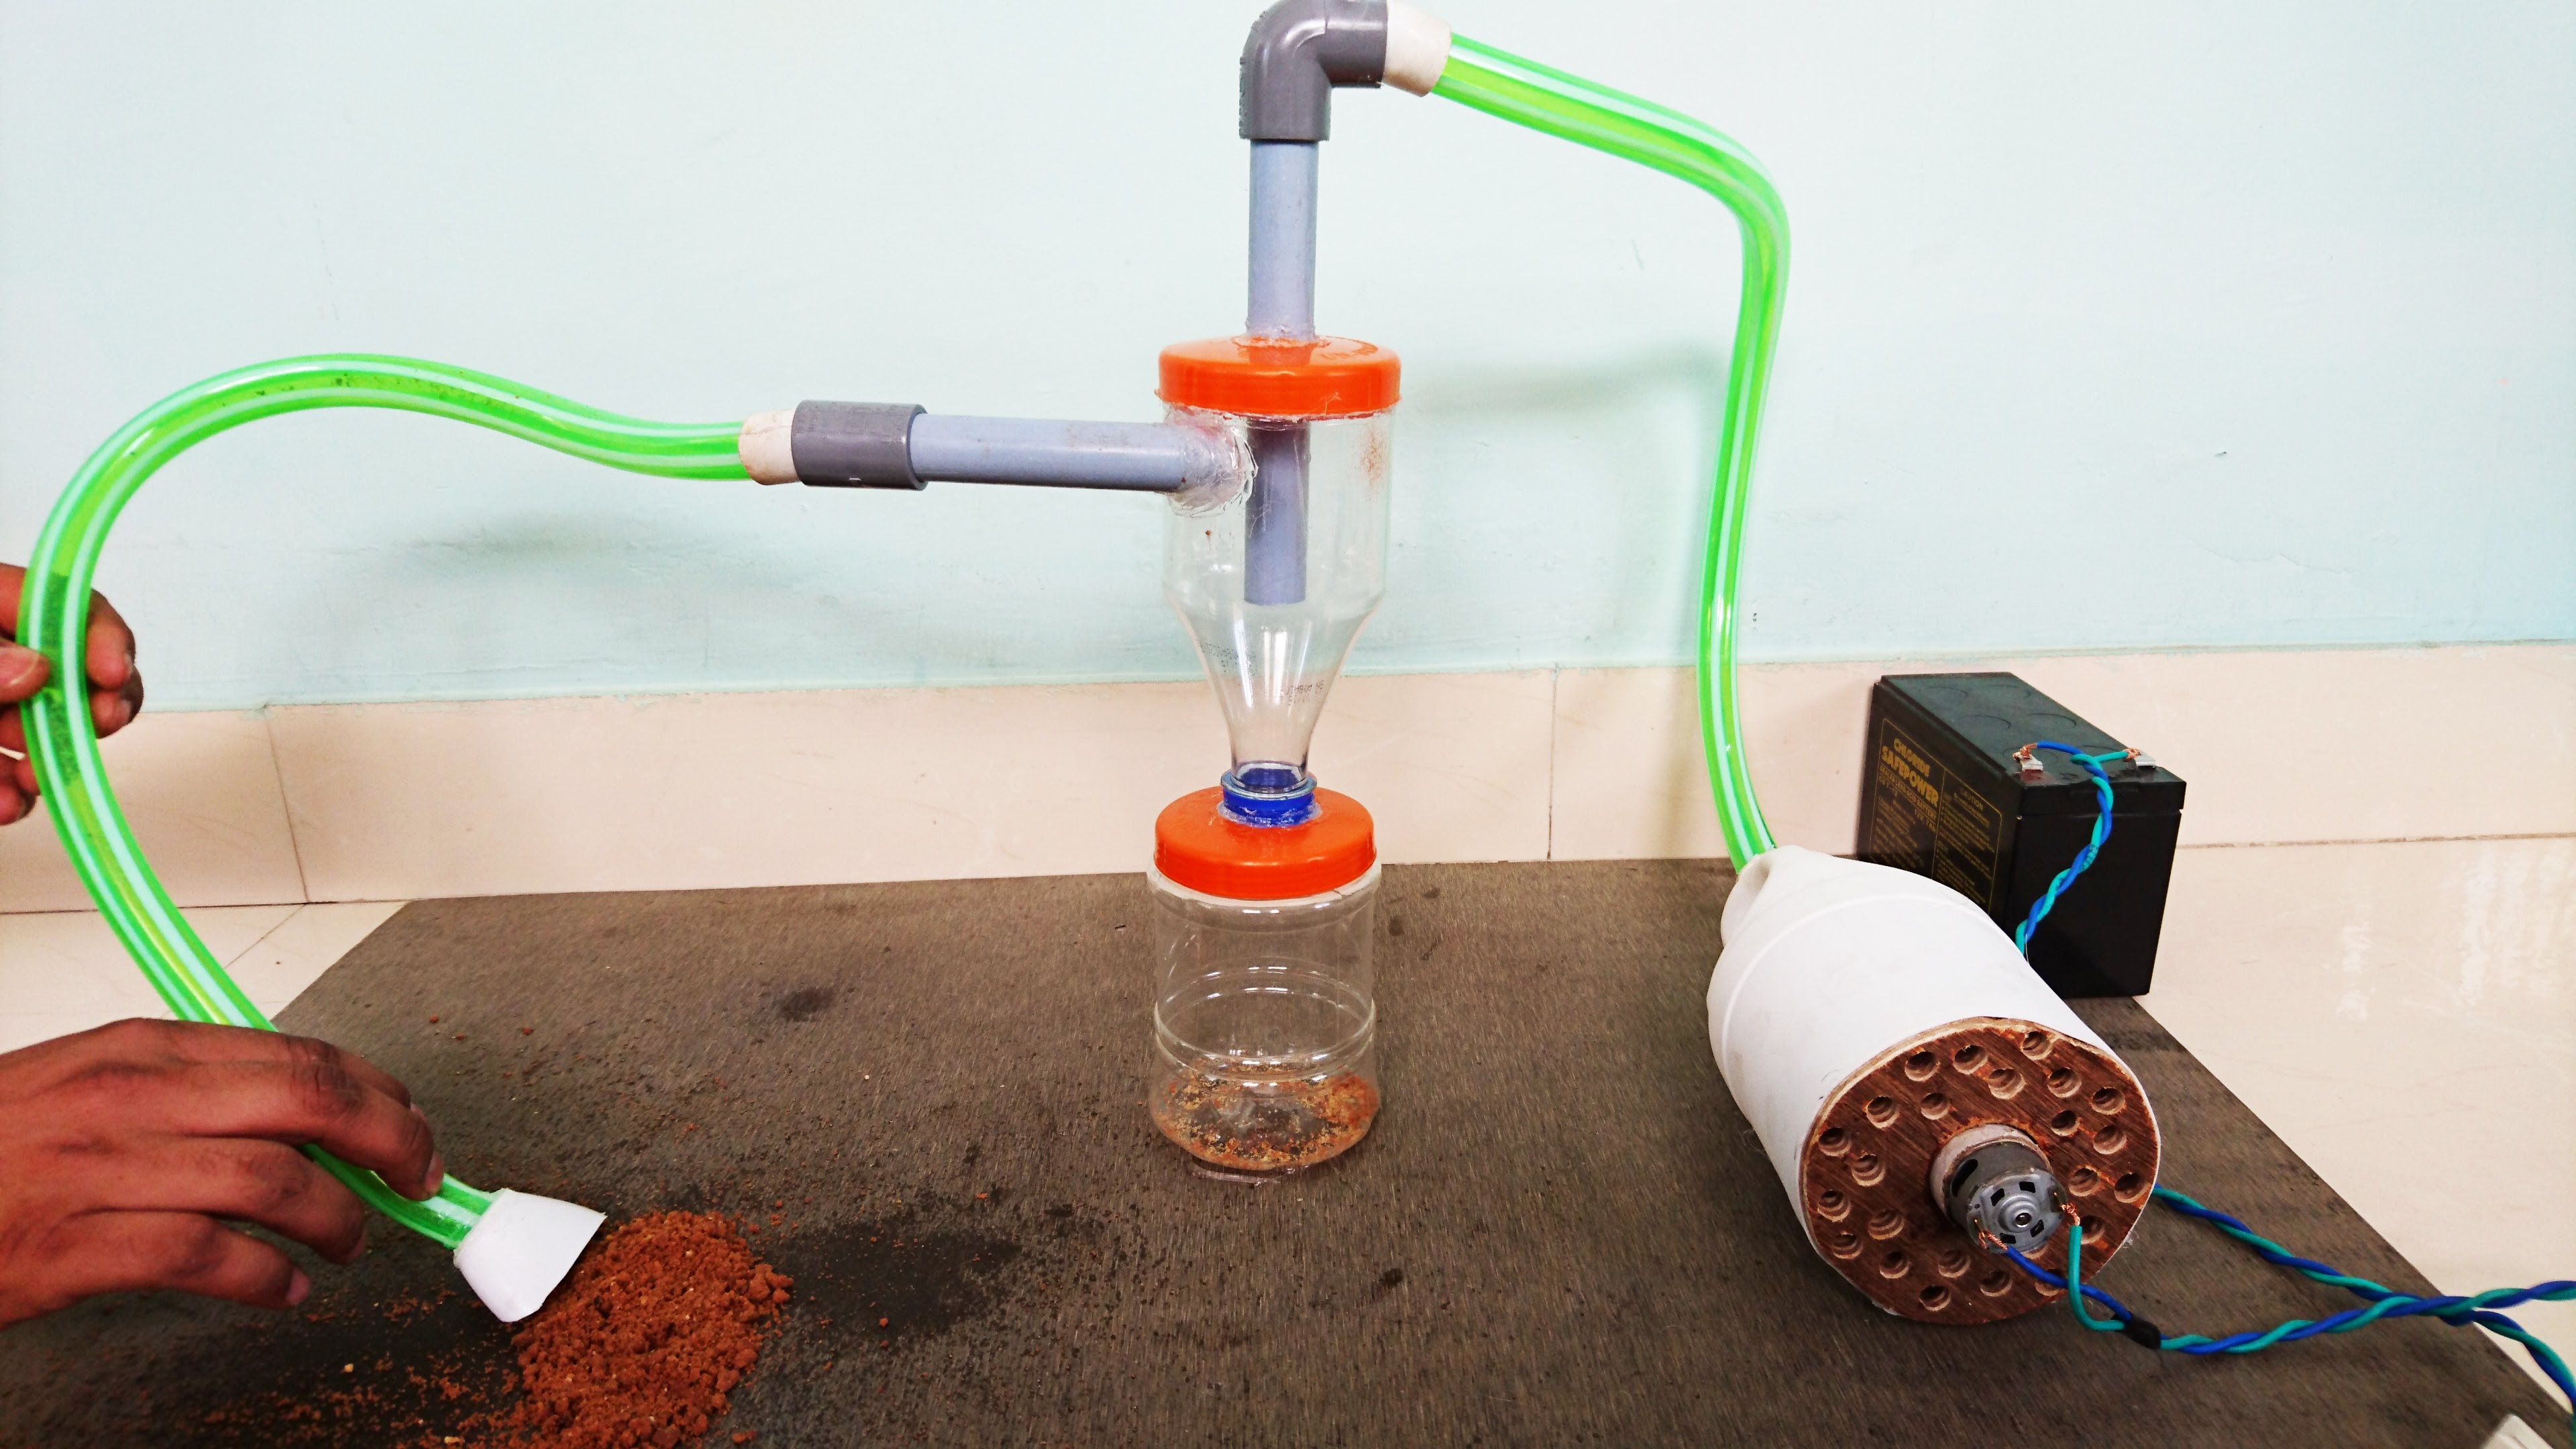 How to Make Cyclone Dust Collector for Vacuum Cleaner at home